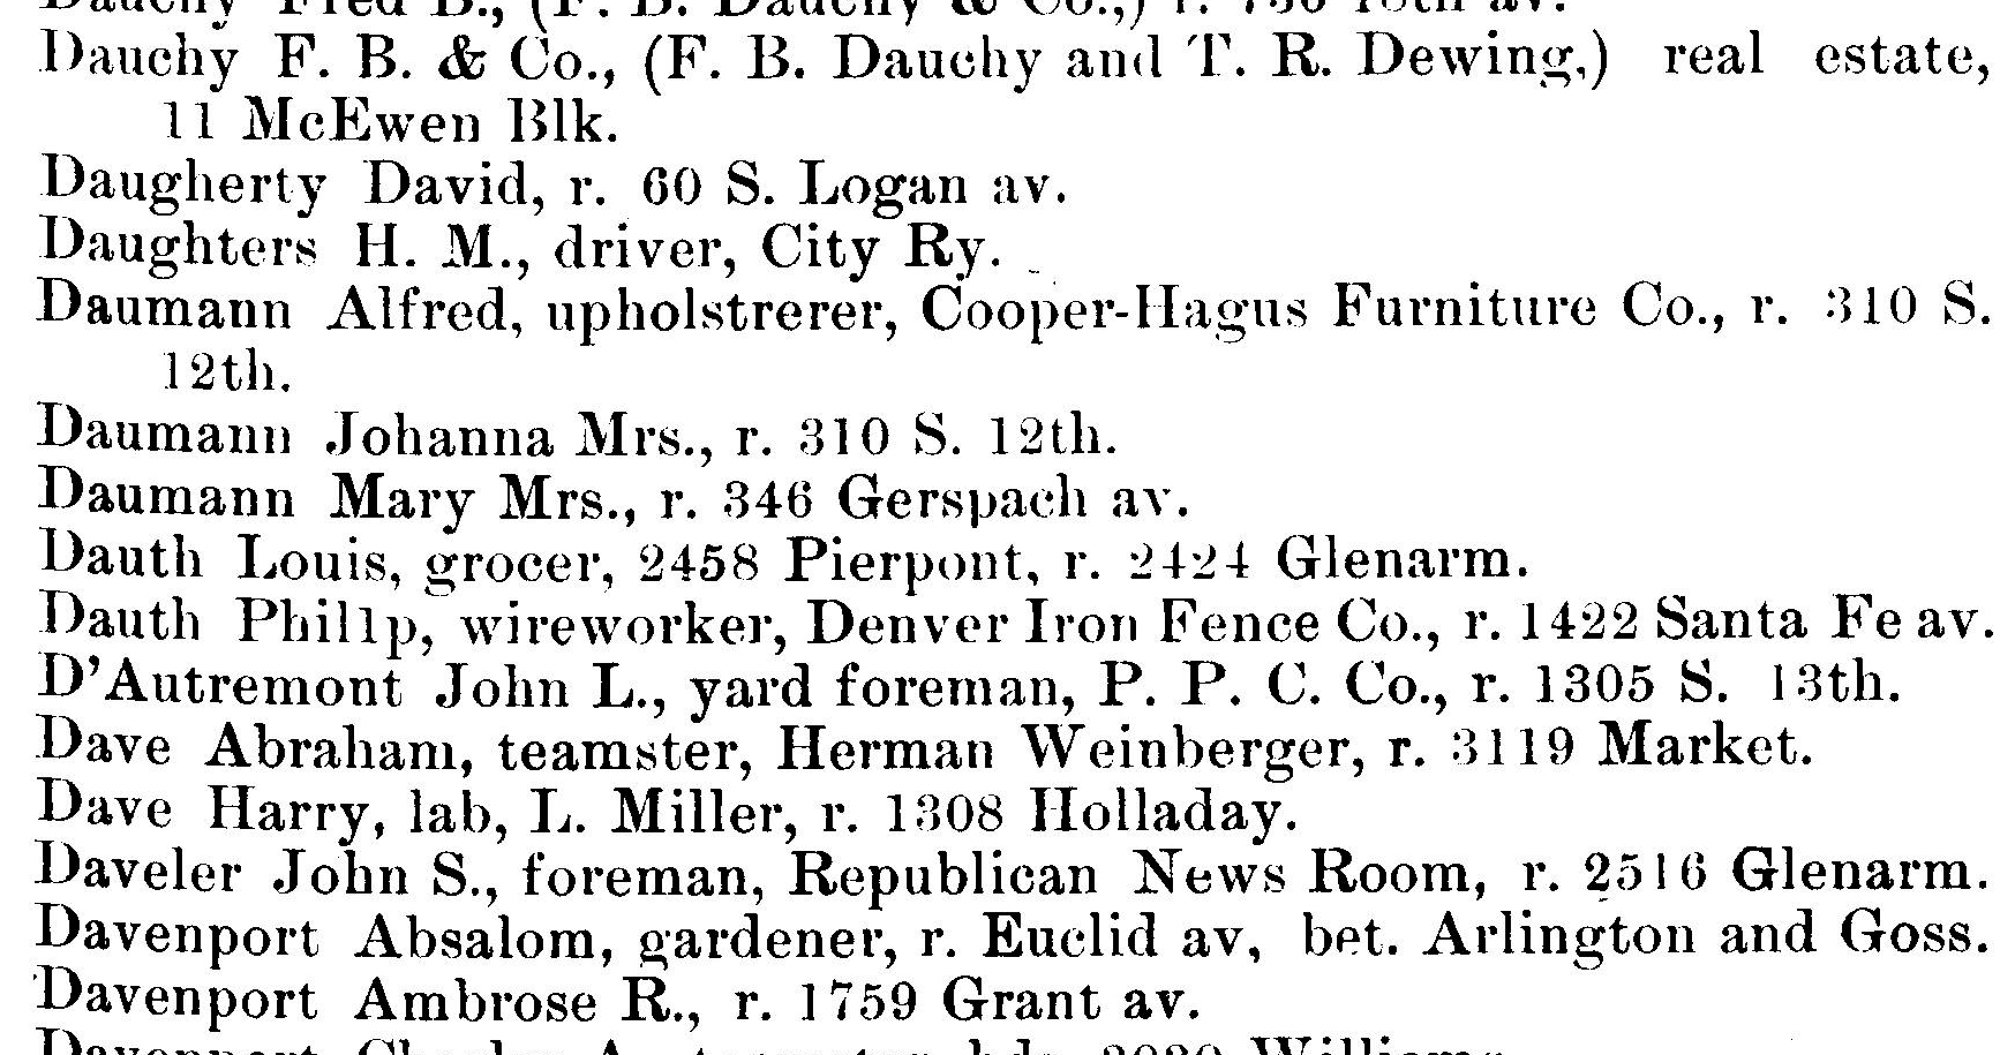 Dauth Family Archive - 1889 - Denver Directory - Entry For Louis and Phillip Dauth